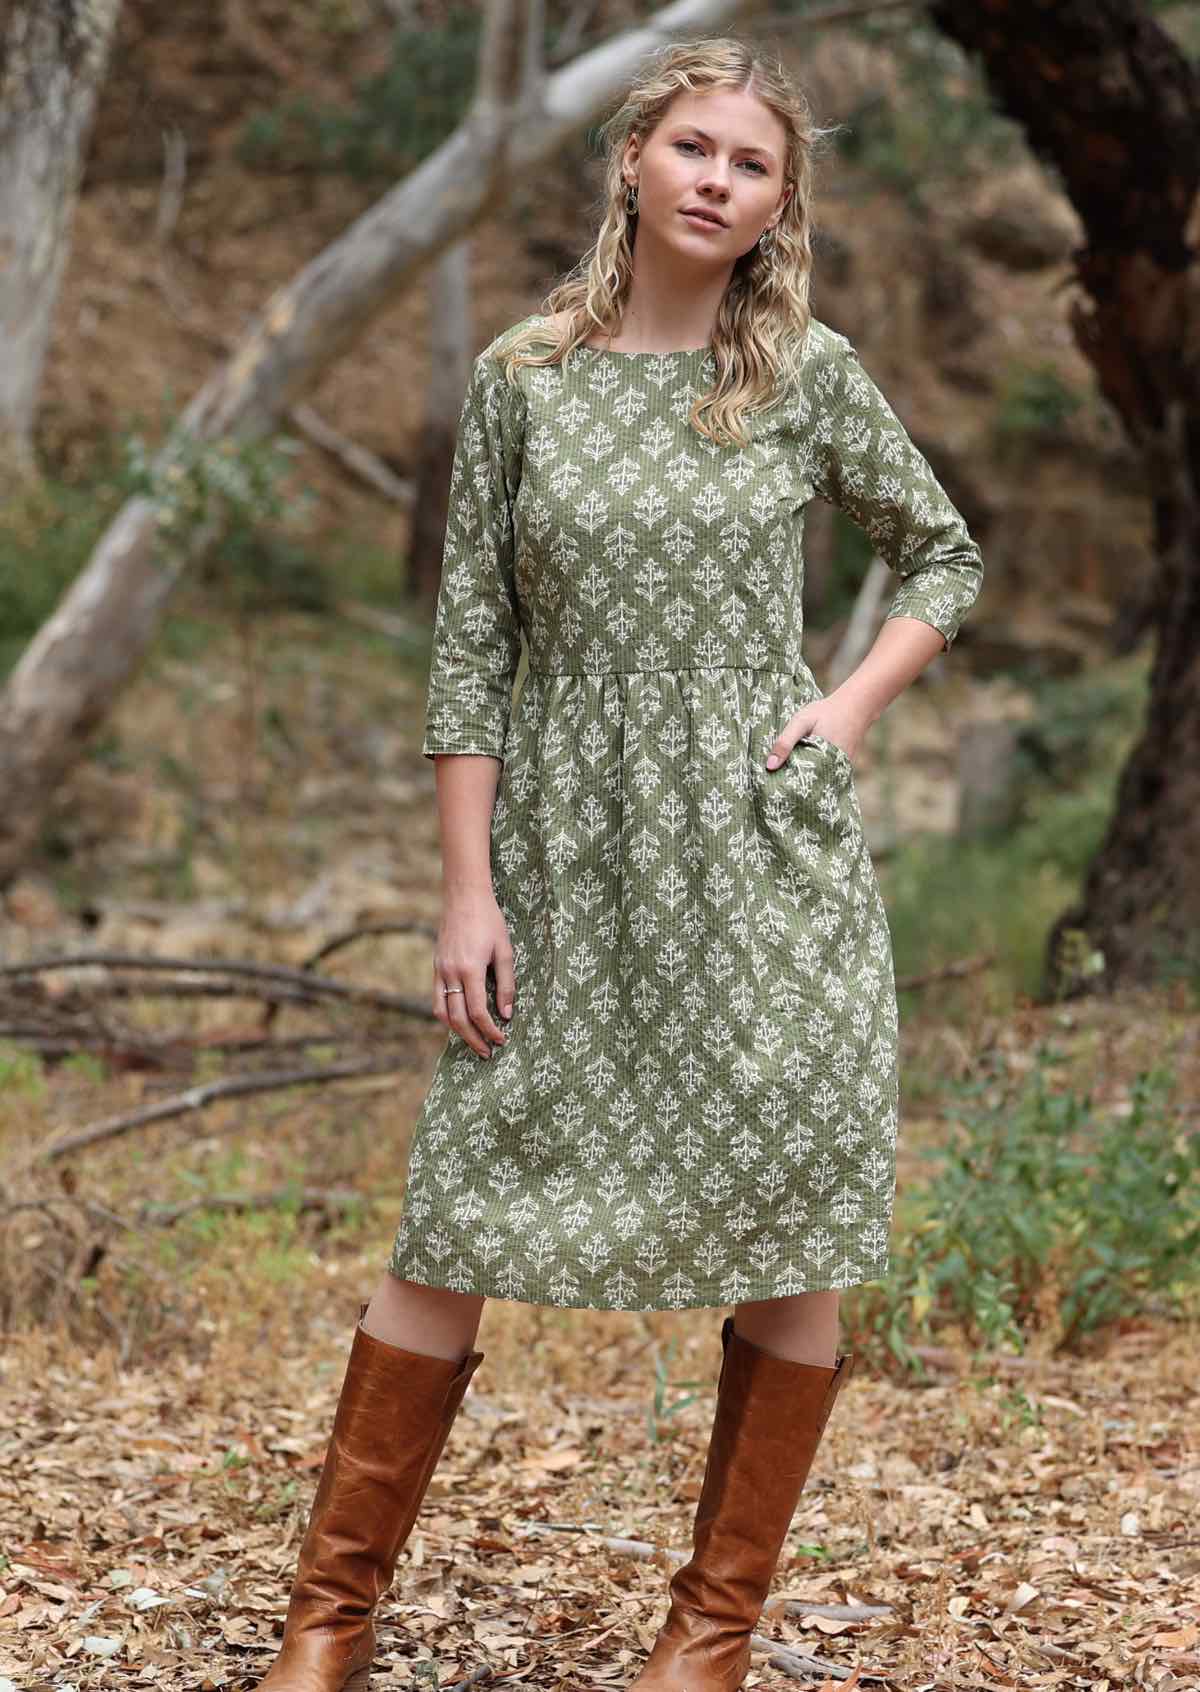 Cotton dress with lining has 3/4 sleeves and pockets